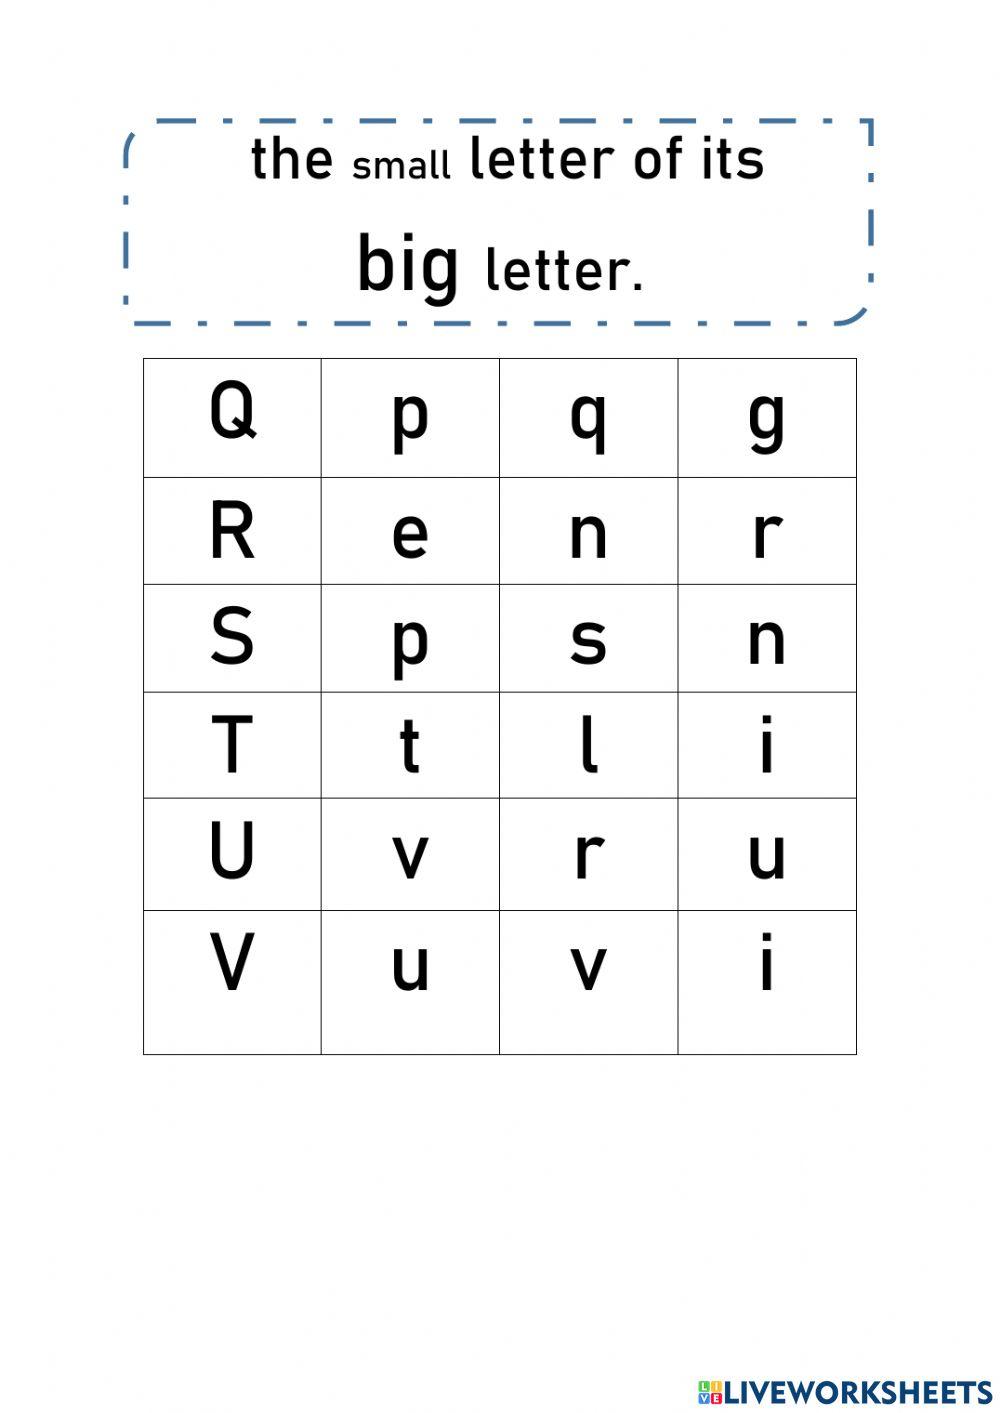 Big Letter - Small Letter